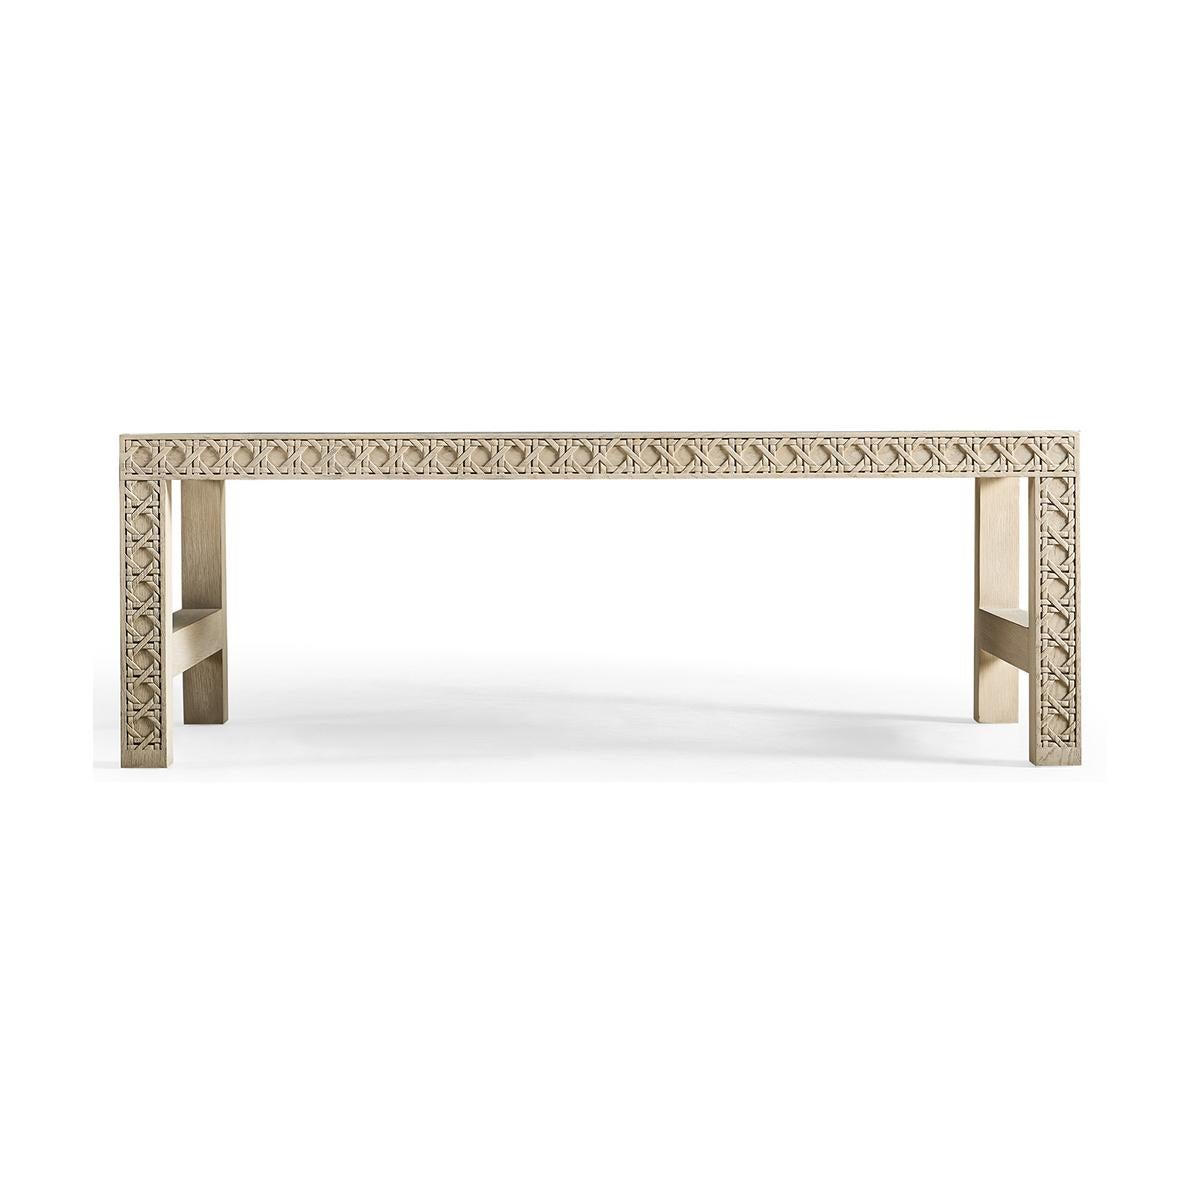 White Washed Oak coffee table, featuring a digitally carved, traditional woven cane design, the table boasts mesmerizing textural layers. White-washed oak with stunning grain detail is paired flawlessly with a solid hardwood top for a sophisticated